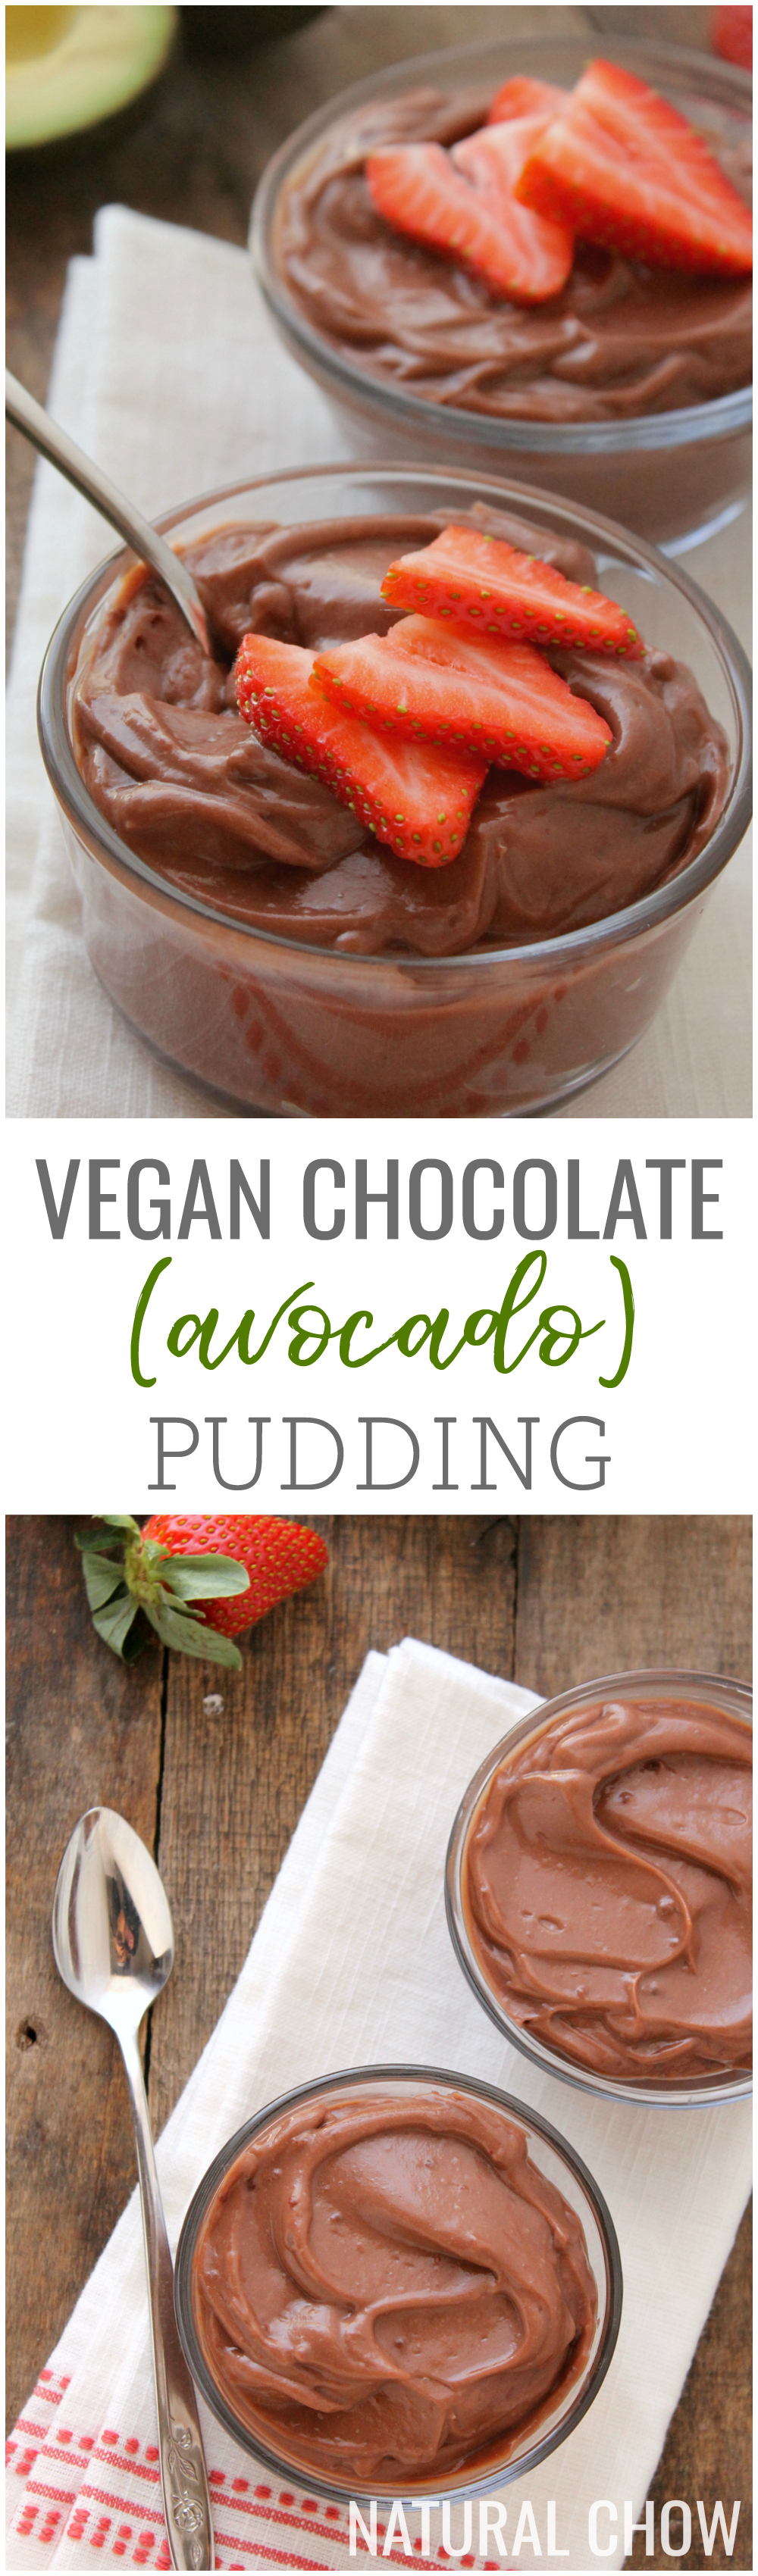 This vegan chocolate avocado pudding is not only SUPER easy to make, but tastes so delicious no one would ever guess it's made with avocados!